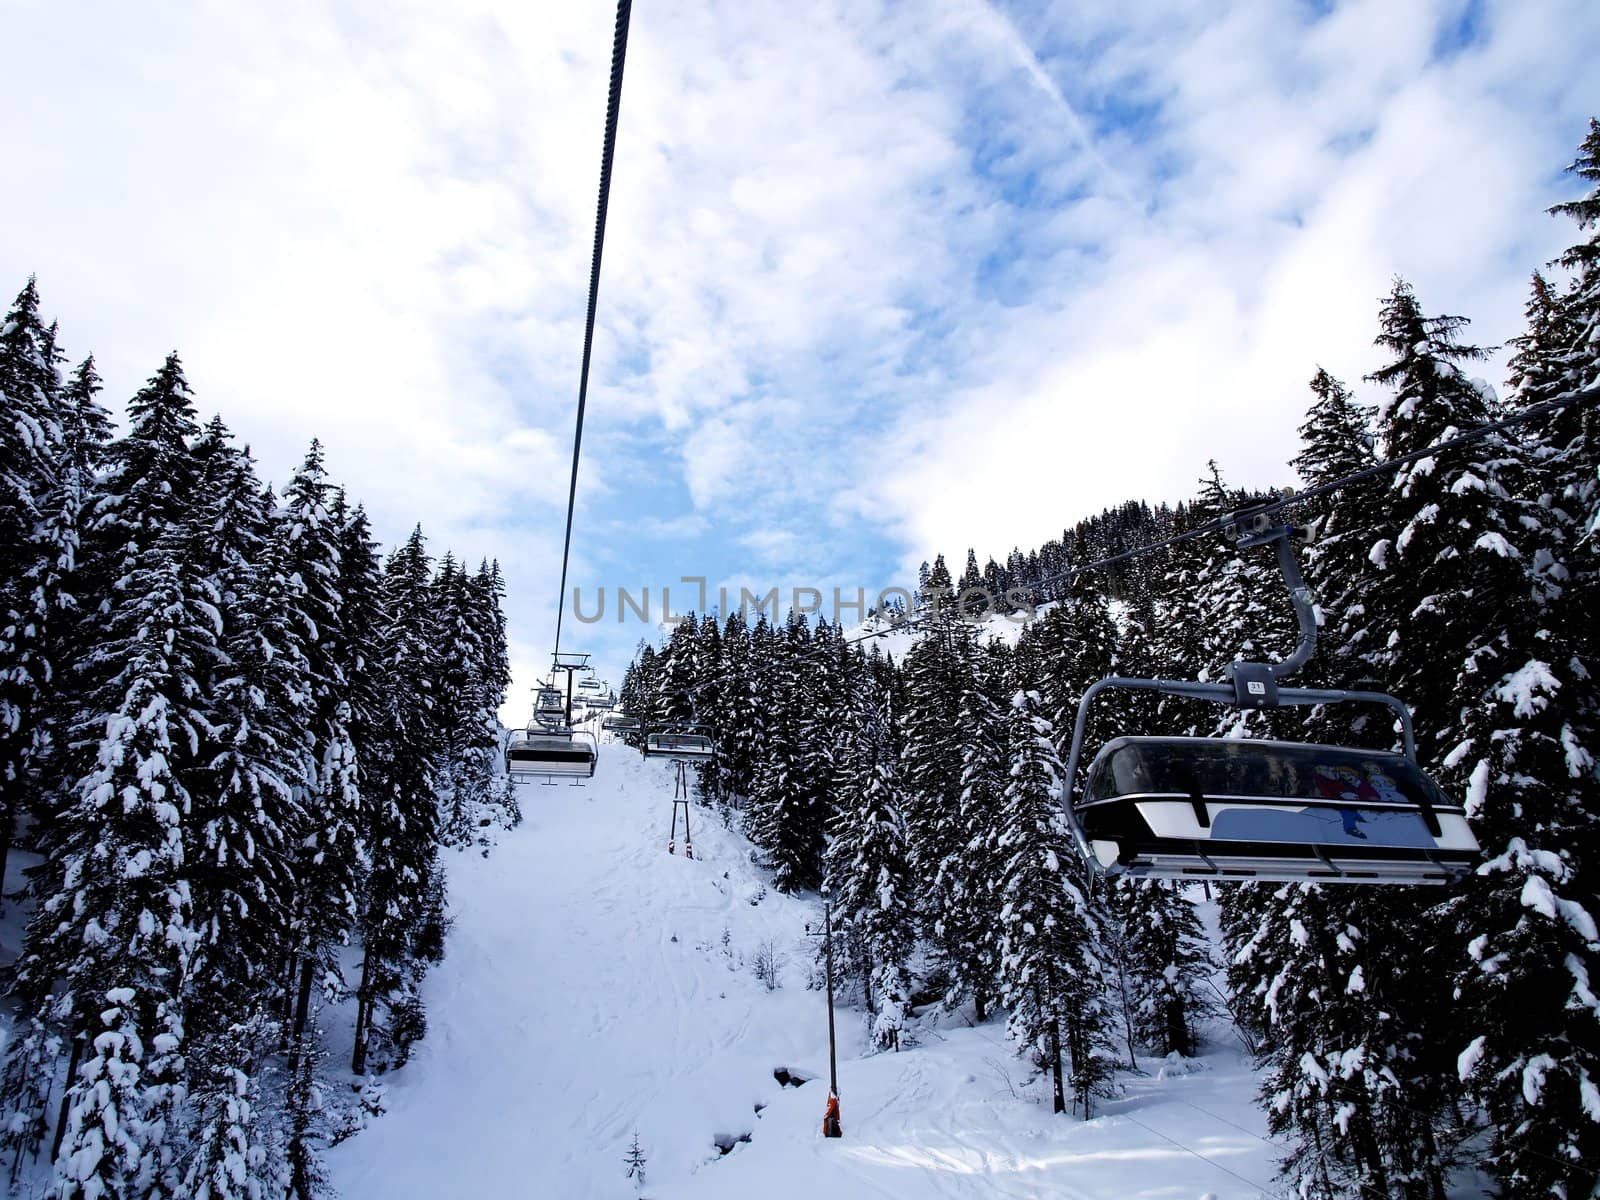 Ski lift with snowy trees and blue sky.